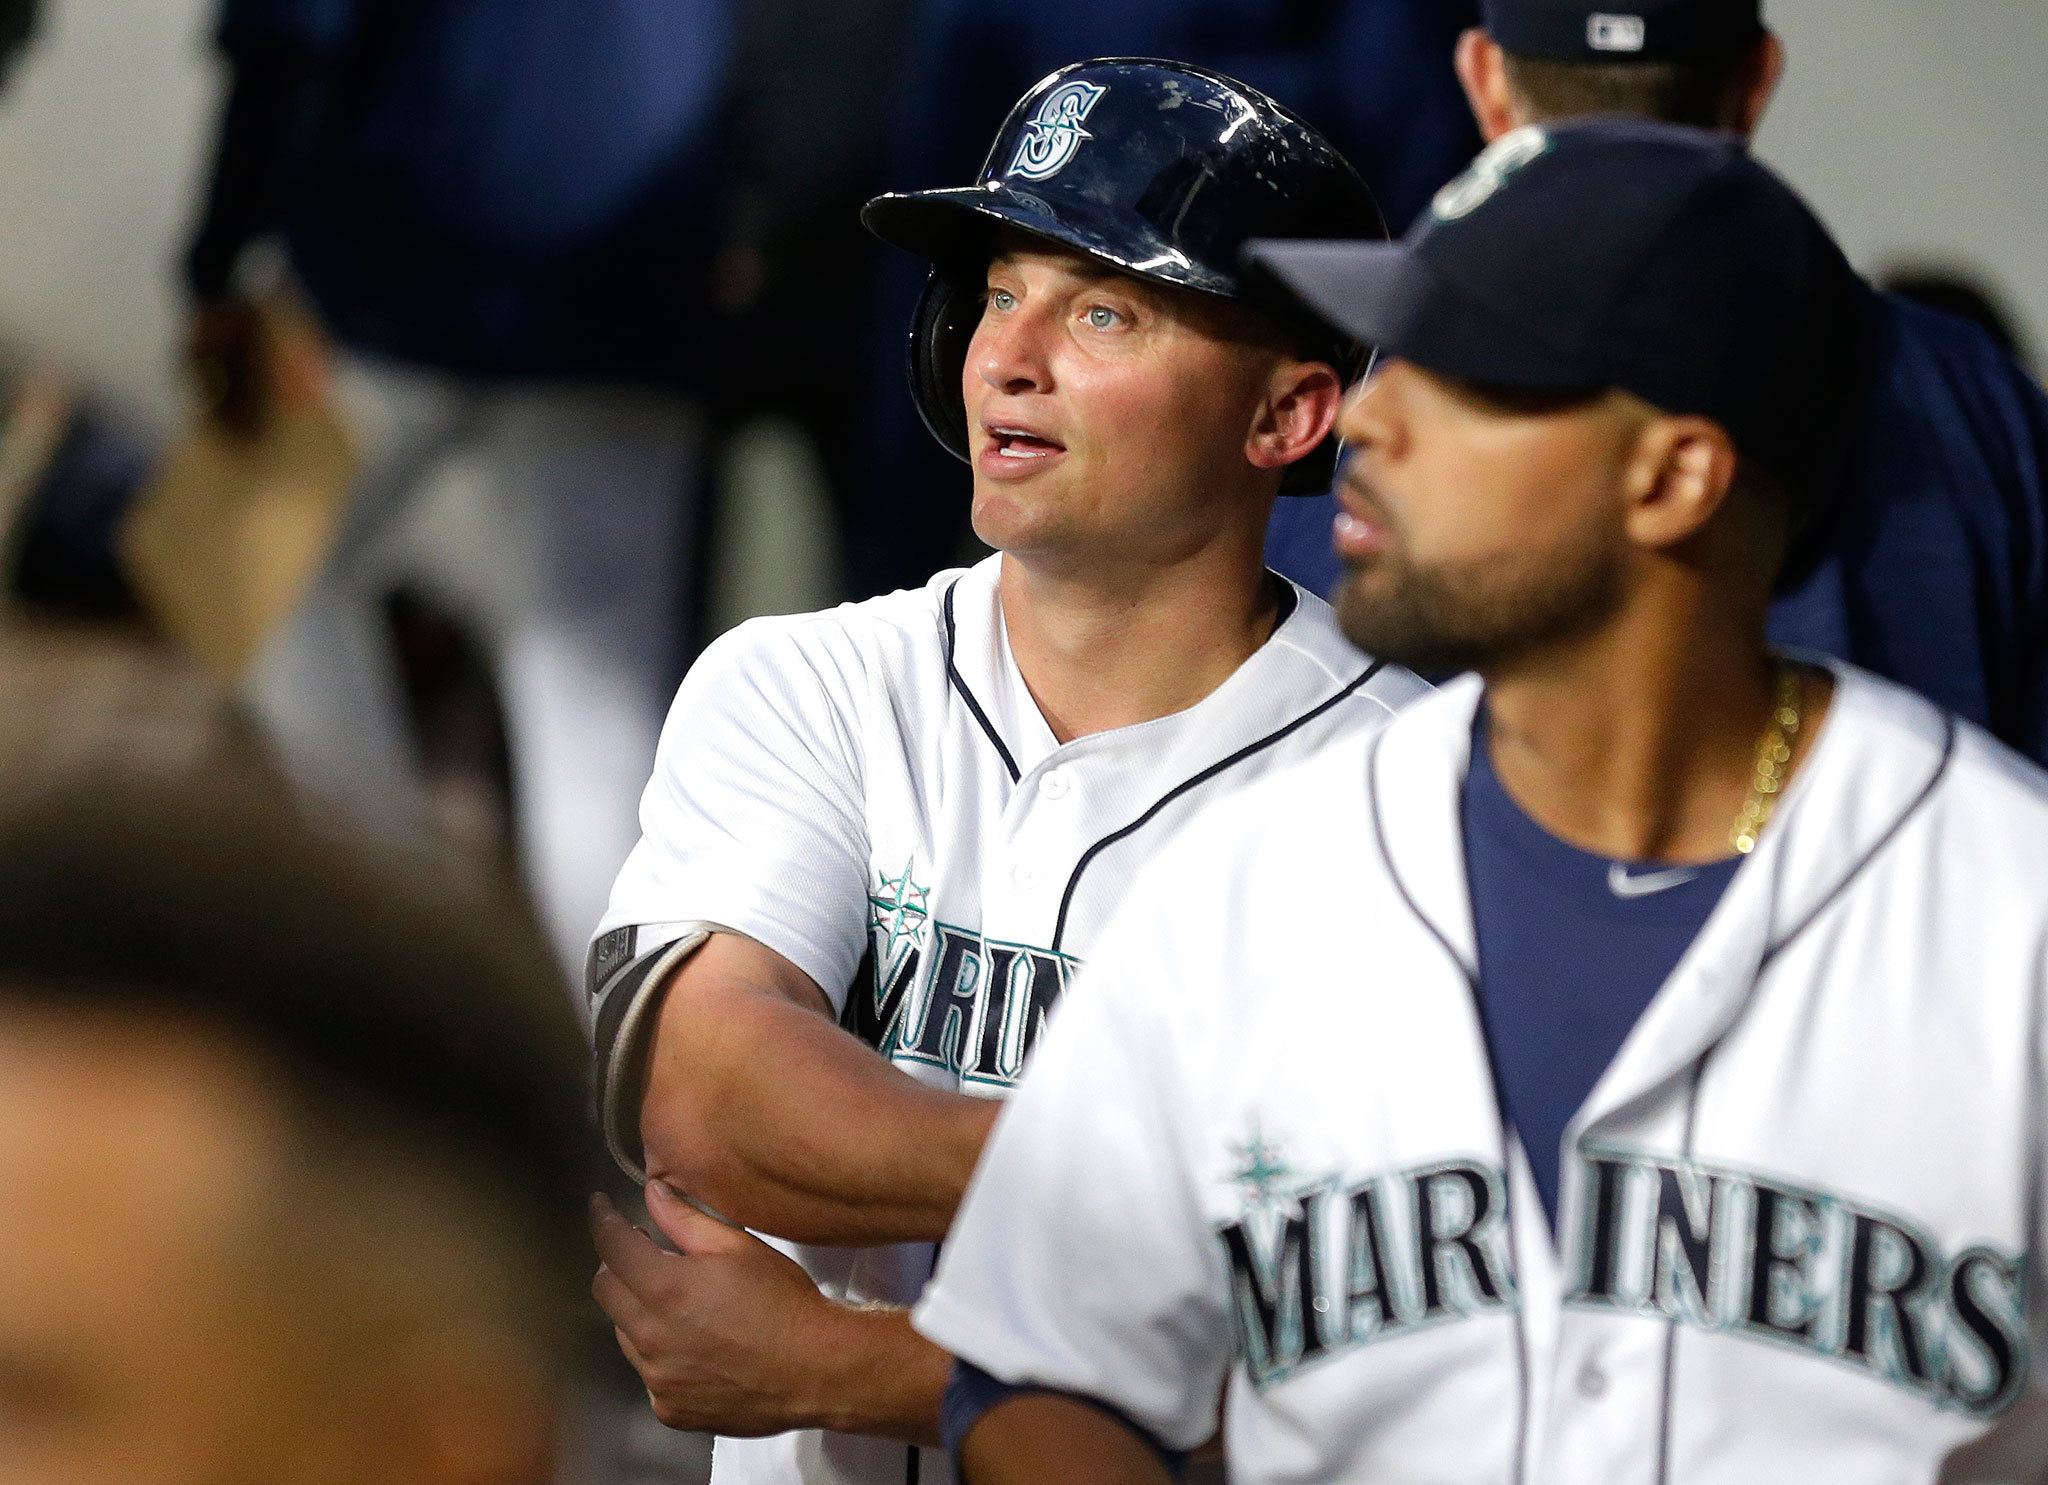 The Mariners’ Kyle Seager watches the replay after he hit a three-run home run in the fourth inning of Monday’s game against the New York Yankees. (AP Photo/Ted S. Warren)